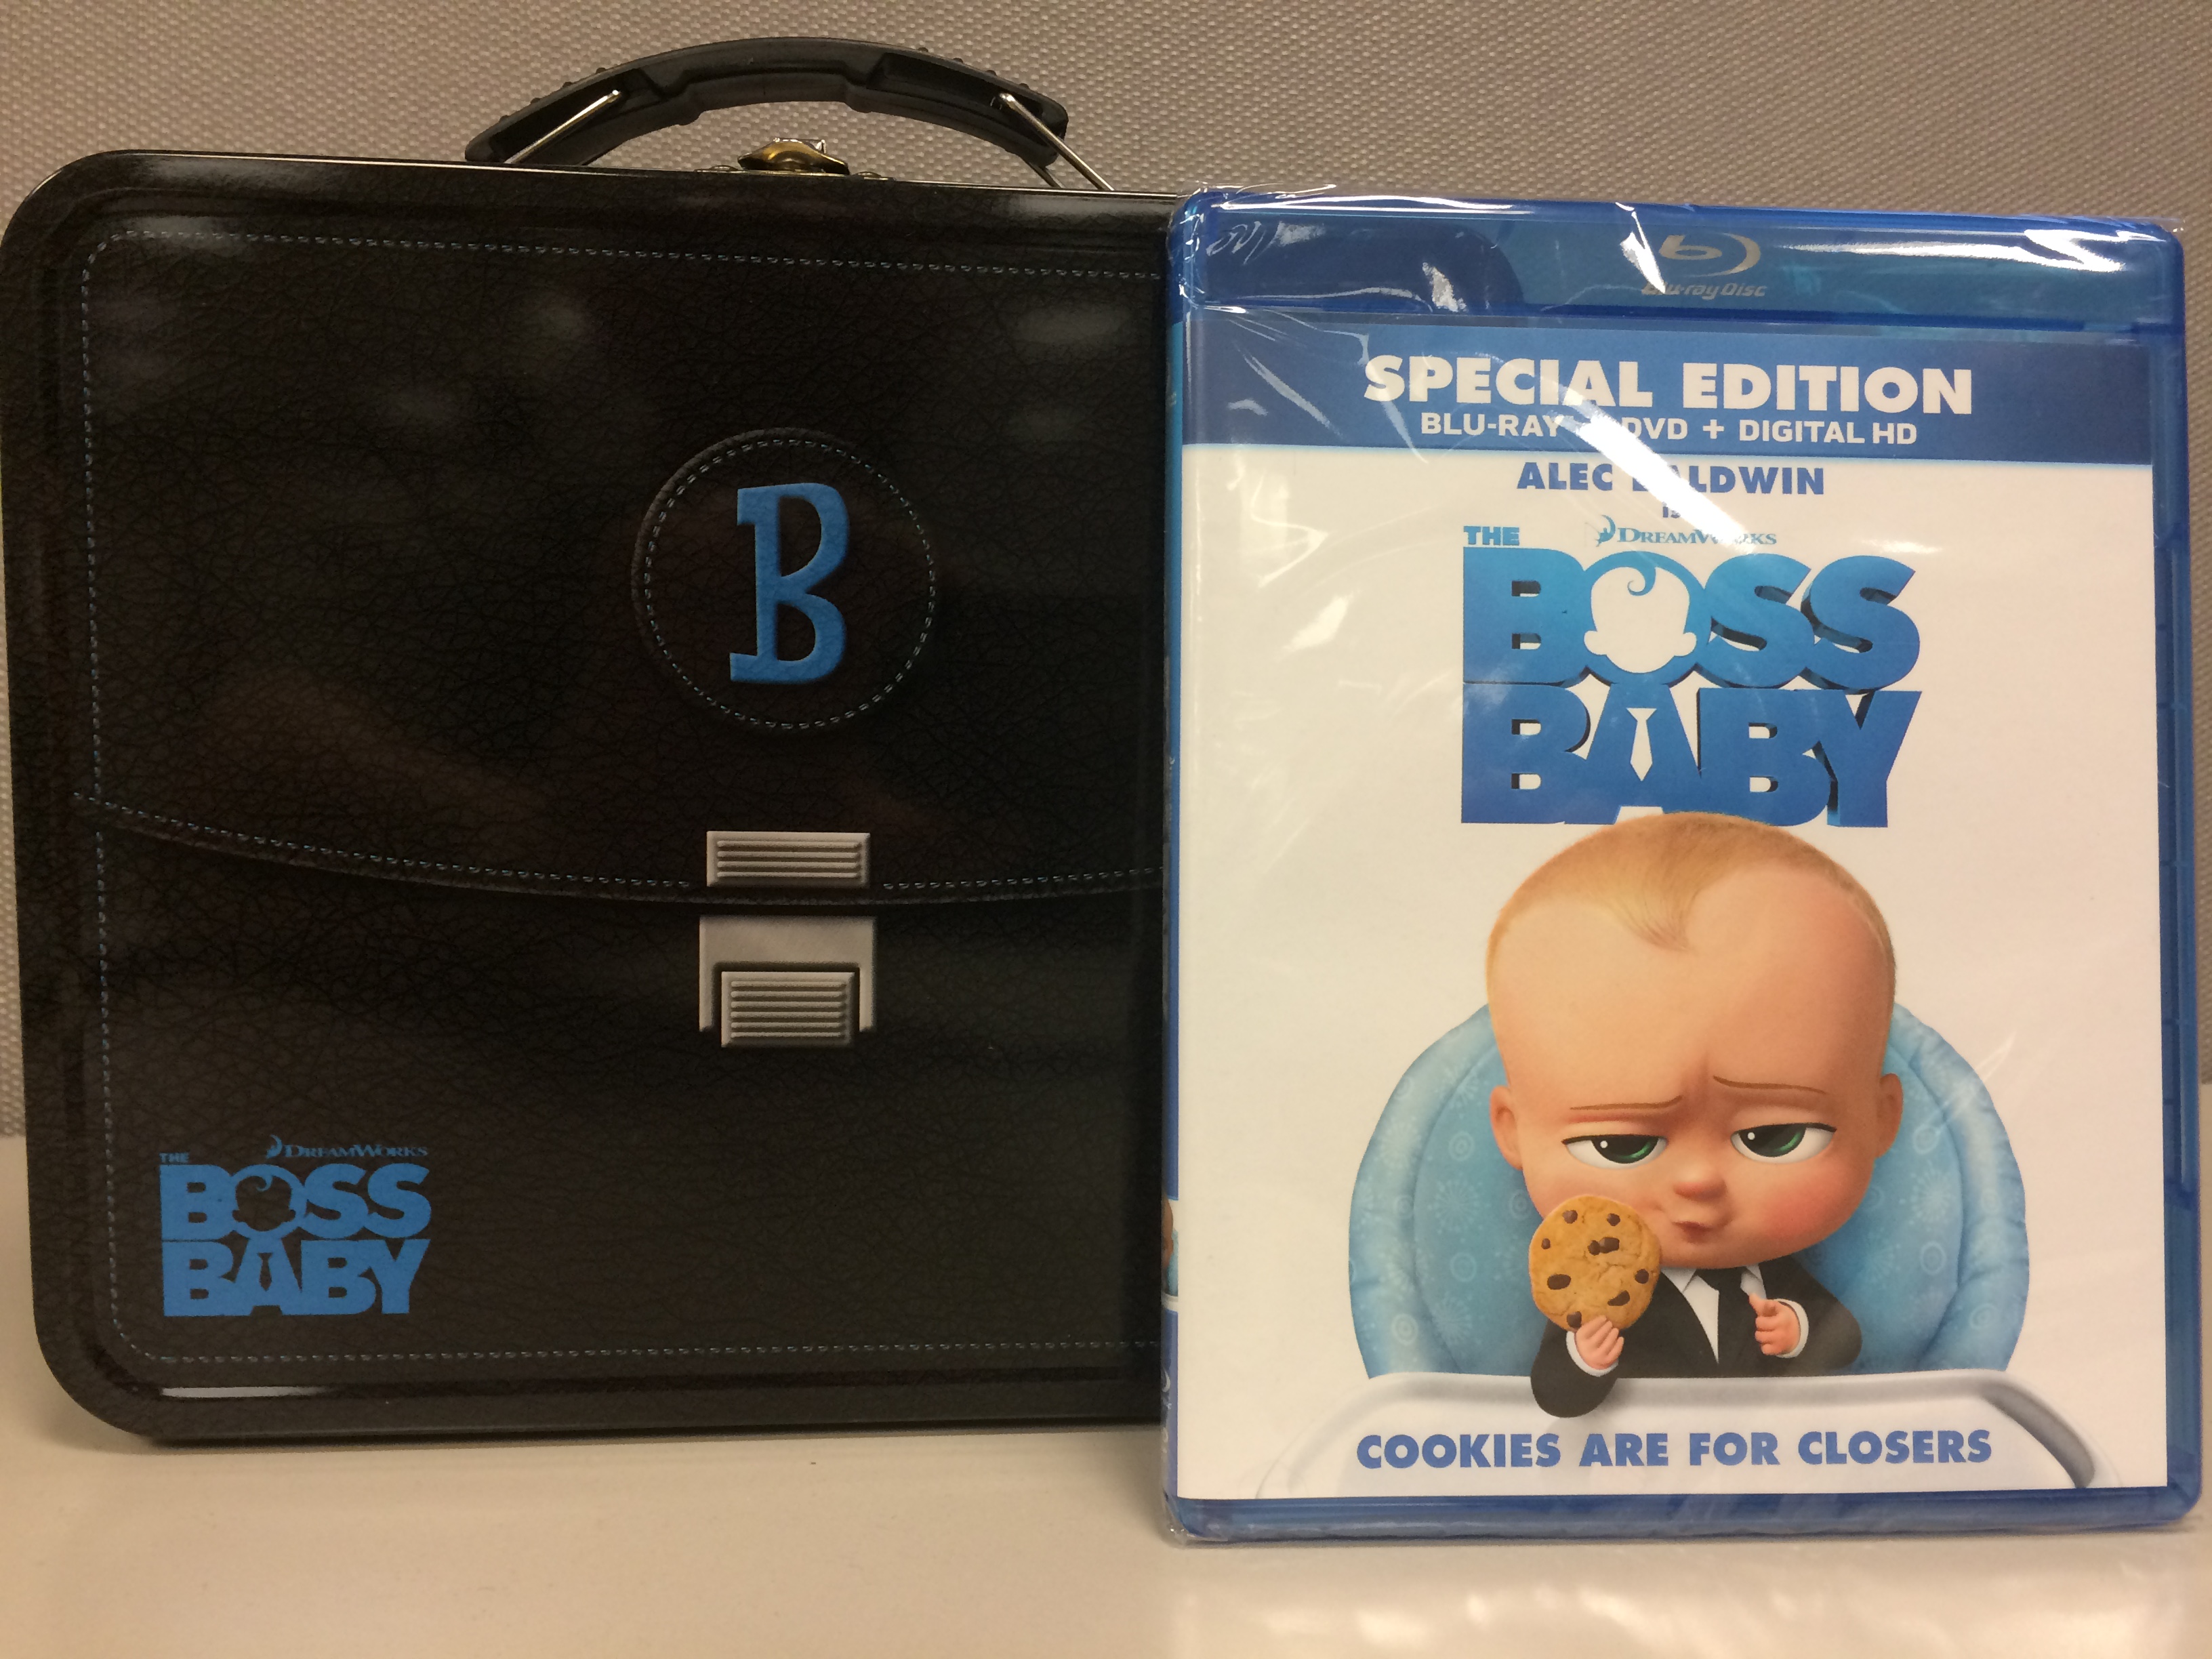 Lunch Like a Boss with The Boss Baby Blu-ray and Metal Lunchbox